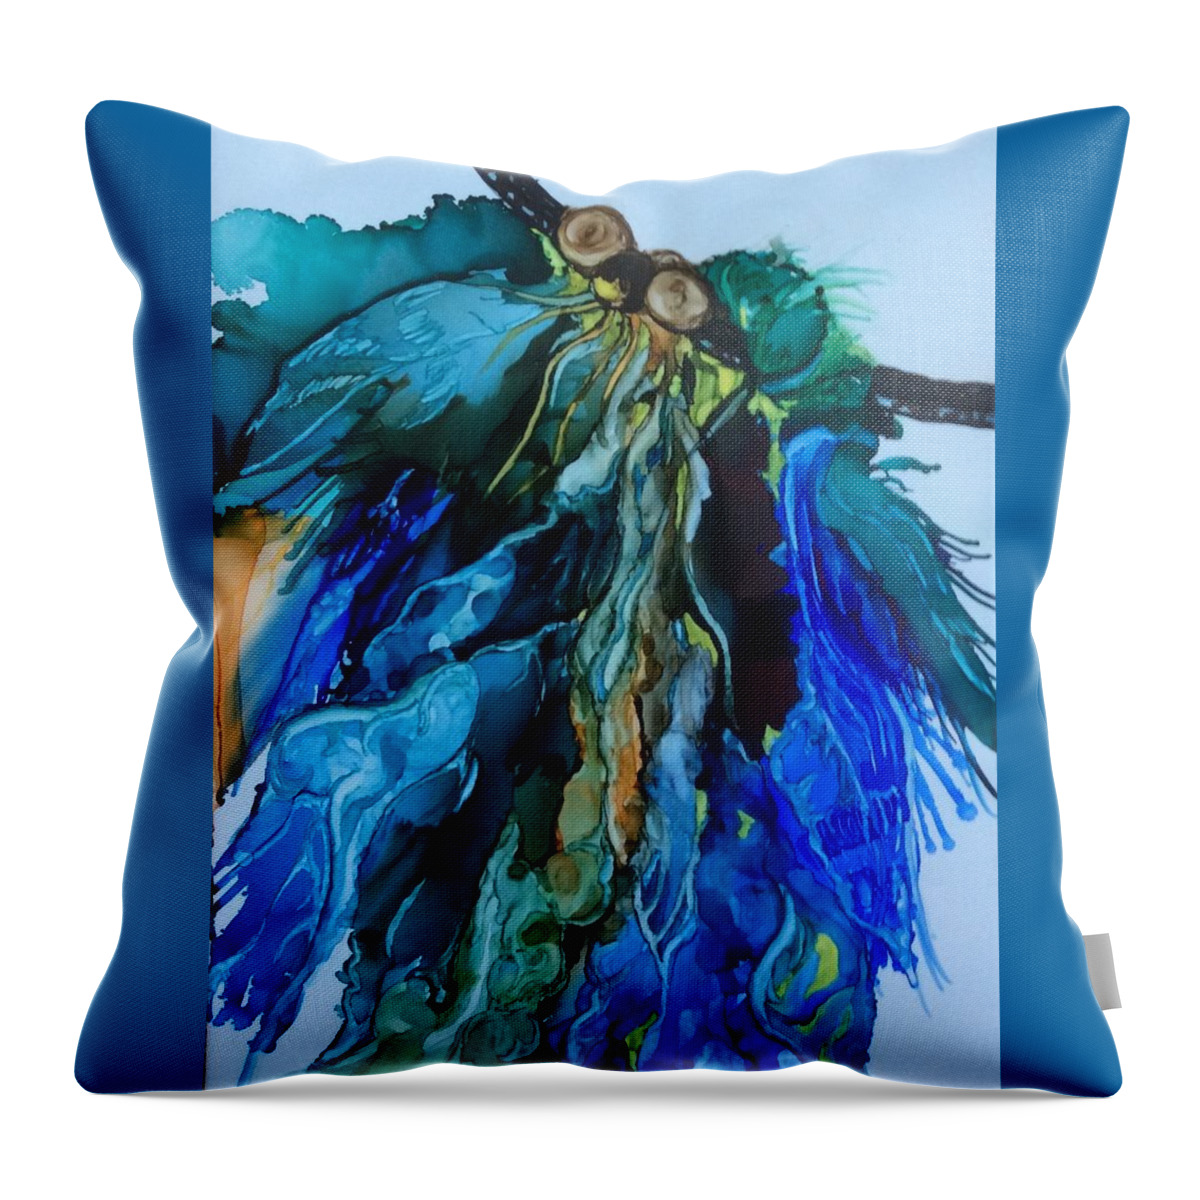 Dream Catcher Throw Pillow featuring the painting Dream Catcher by Pat Purdy